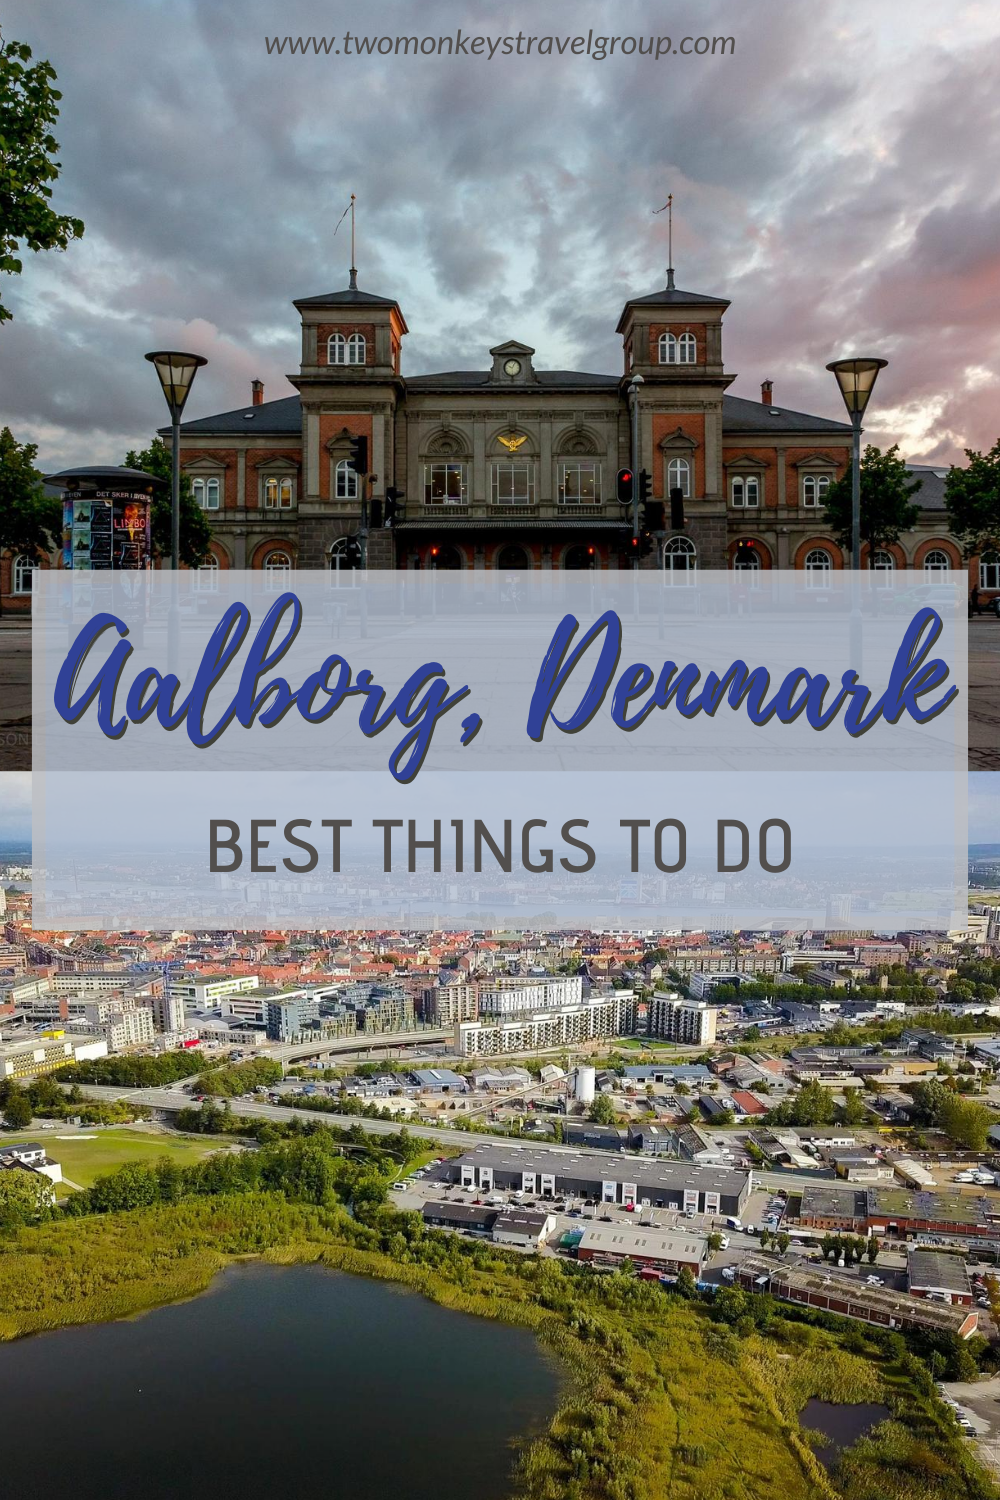 Top 15 things to do in Aalborg, Denmark